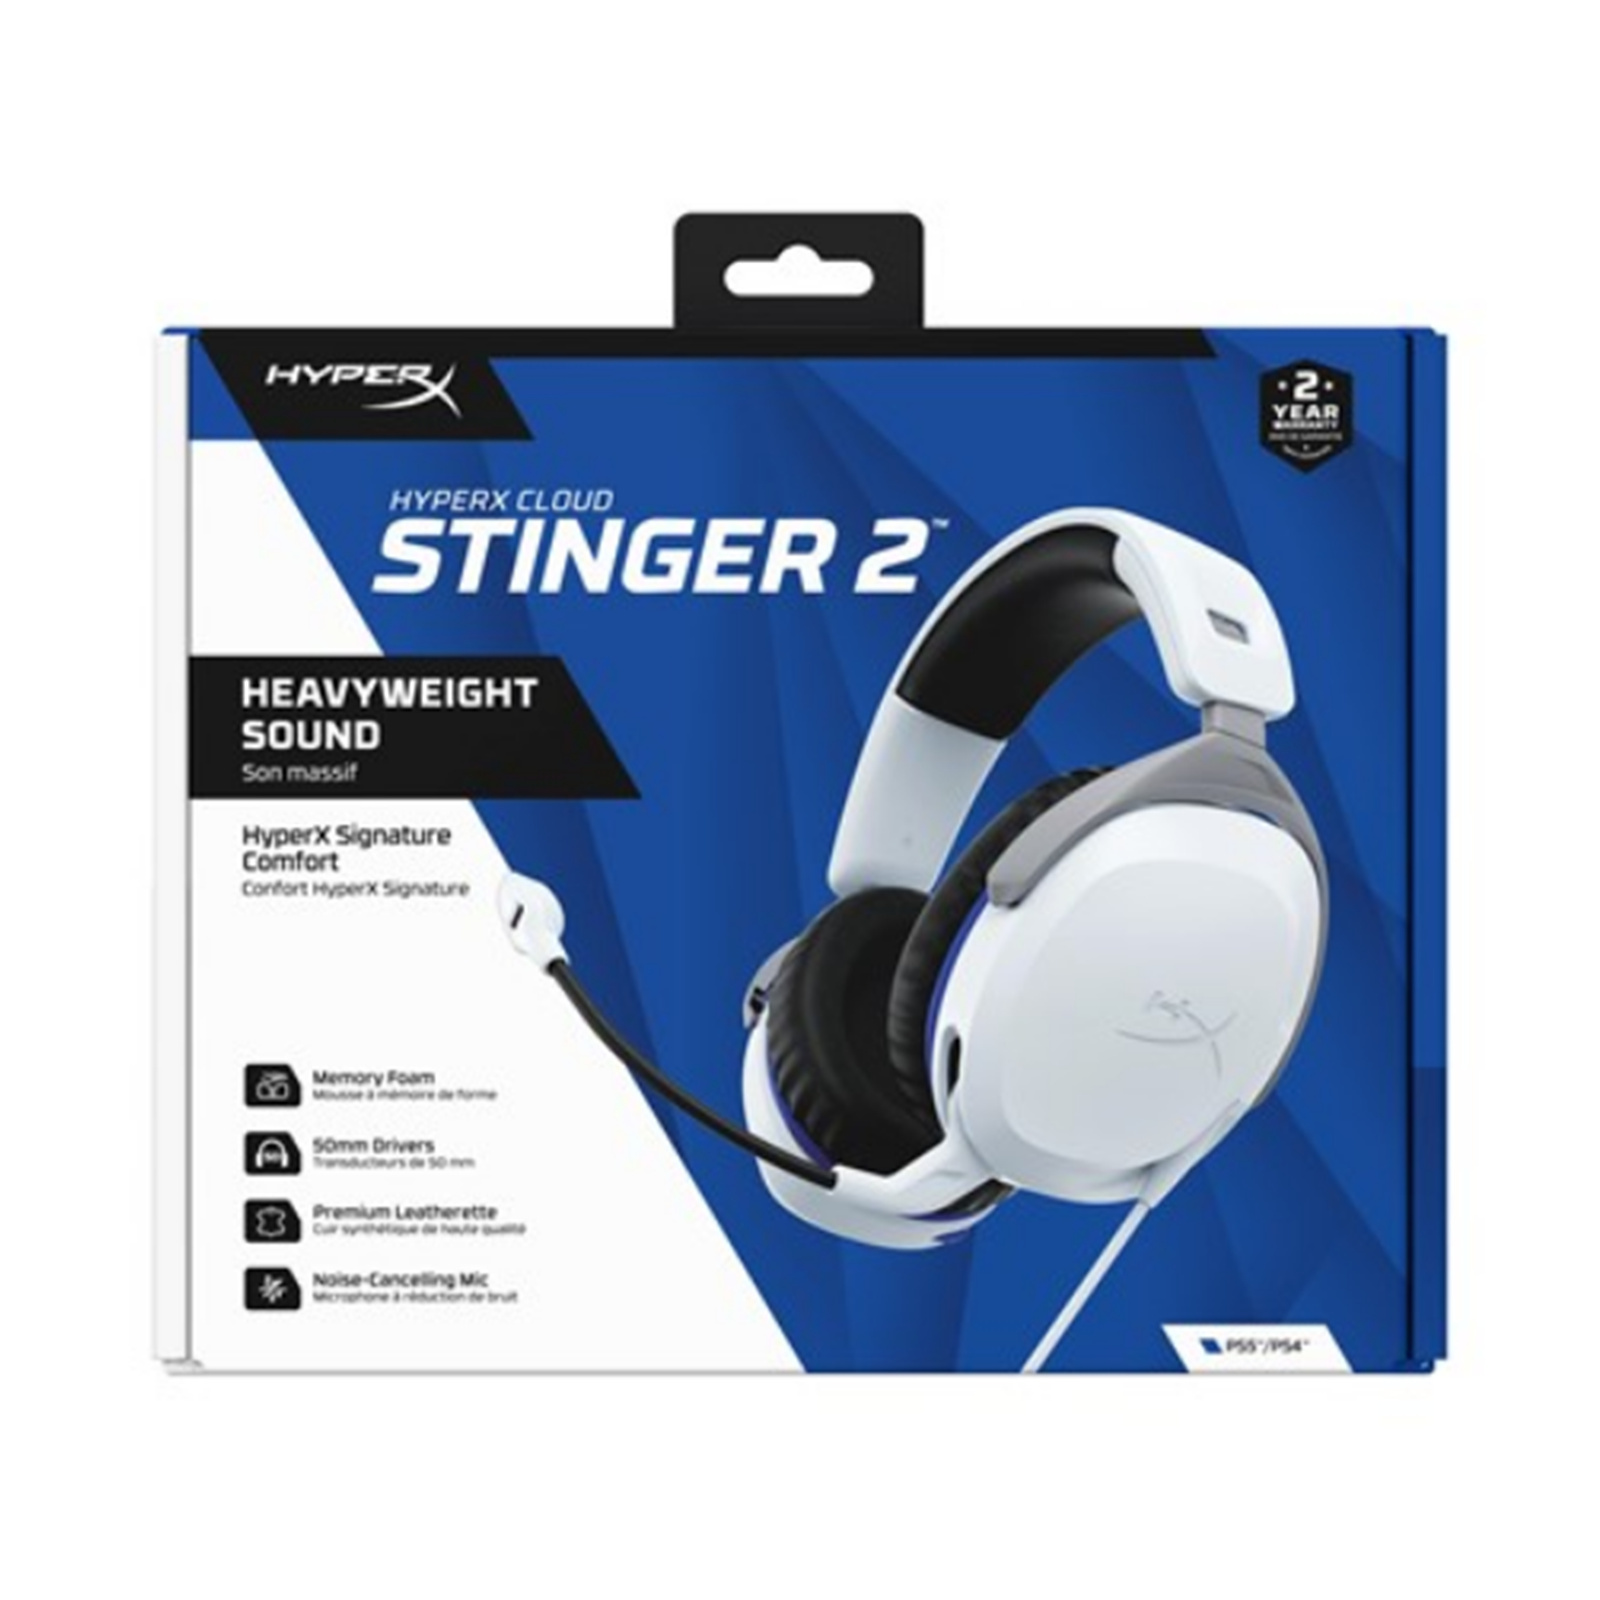 Buy the HyperX Stinger 2 Gaming Headset for Playstation ( 75X29AA ) online